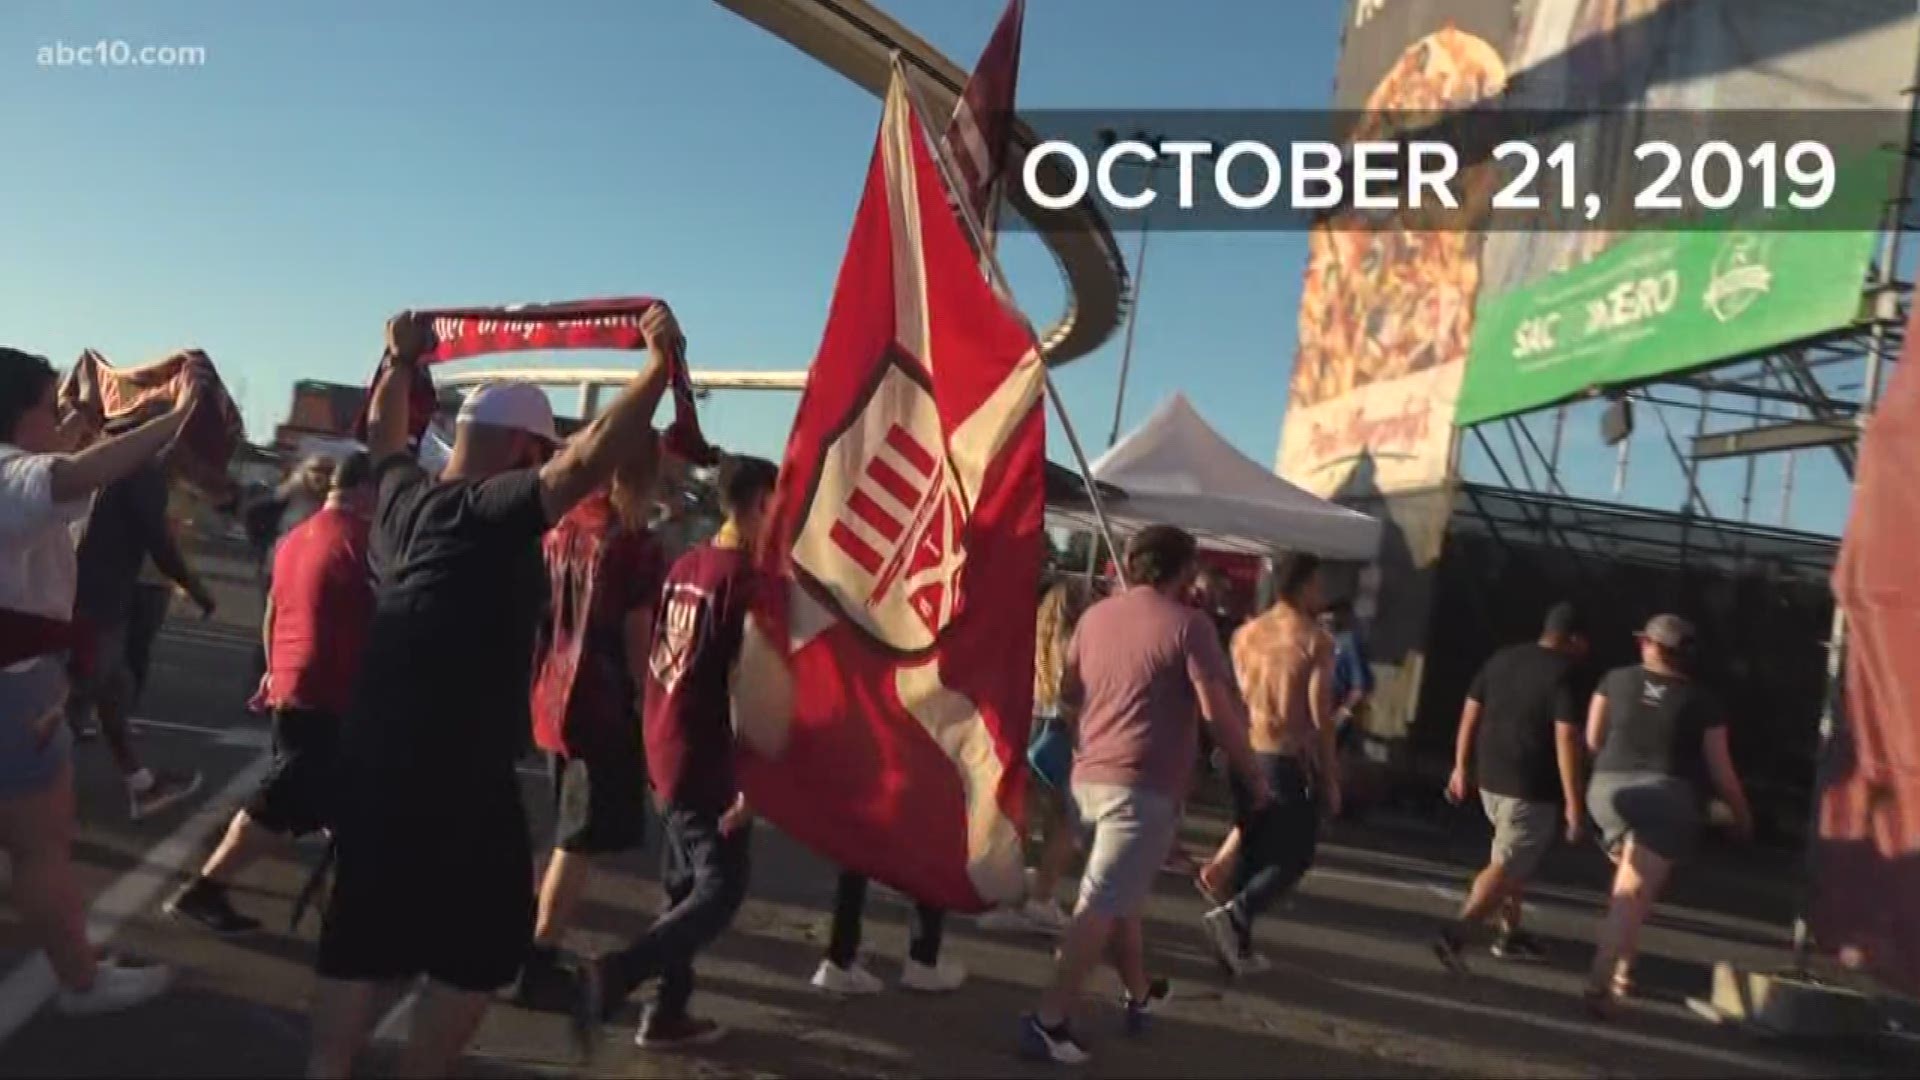 Sacramento Republic FC's goal of becoming an MLS team, is set to become reality.